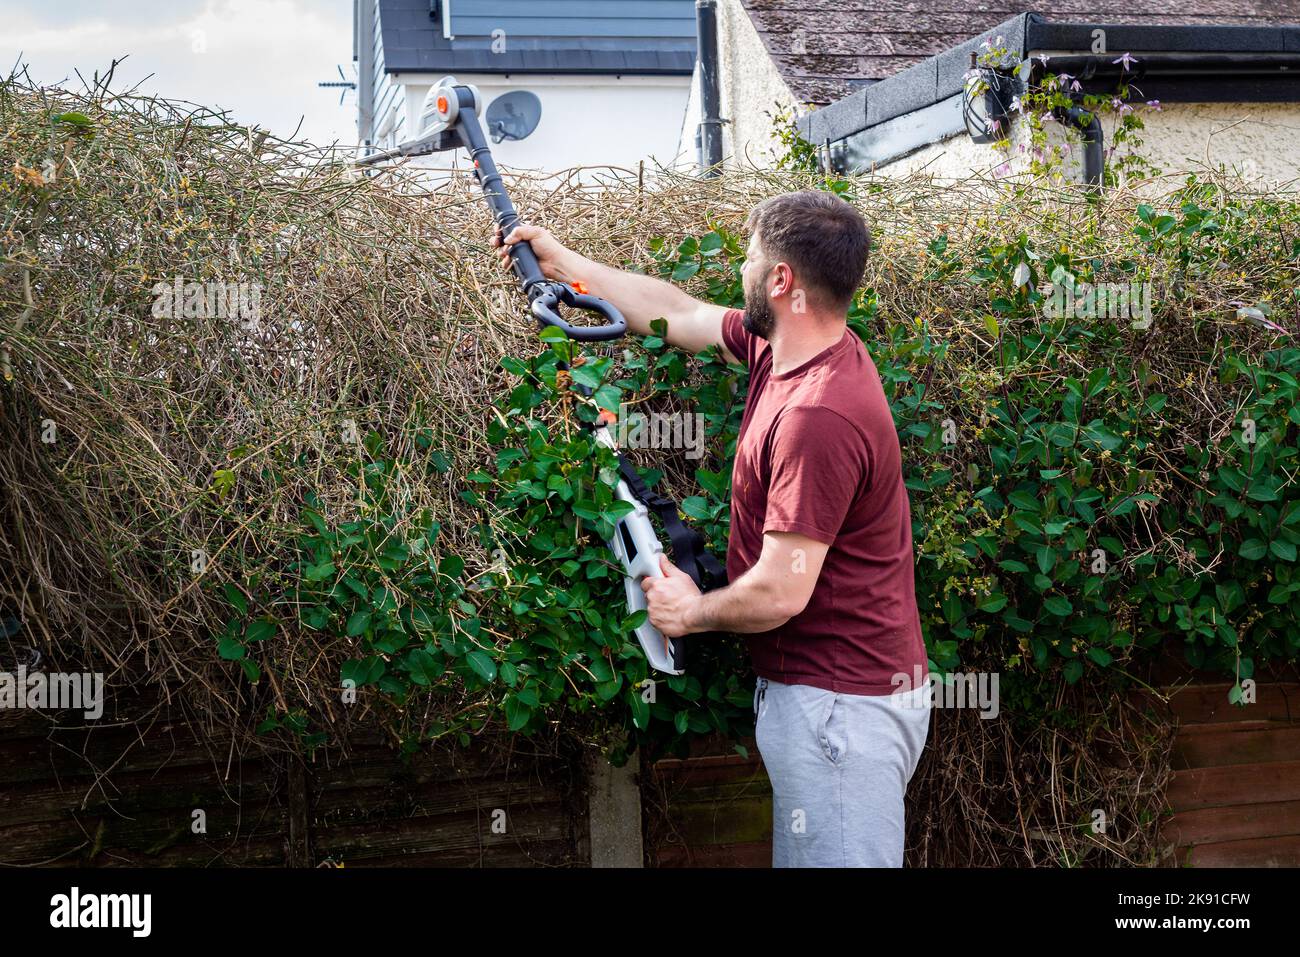 Gardener cutting hedges reaches over tall hedge with clippers to cut high up twigs and branches. Stock Photo